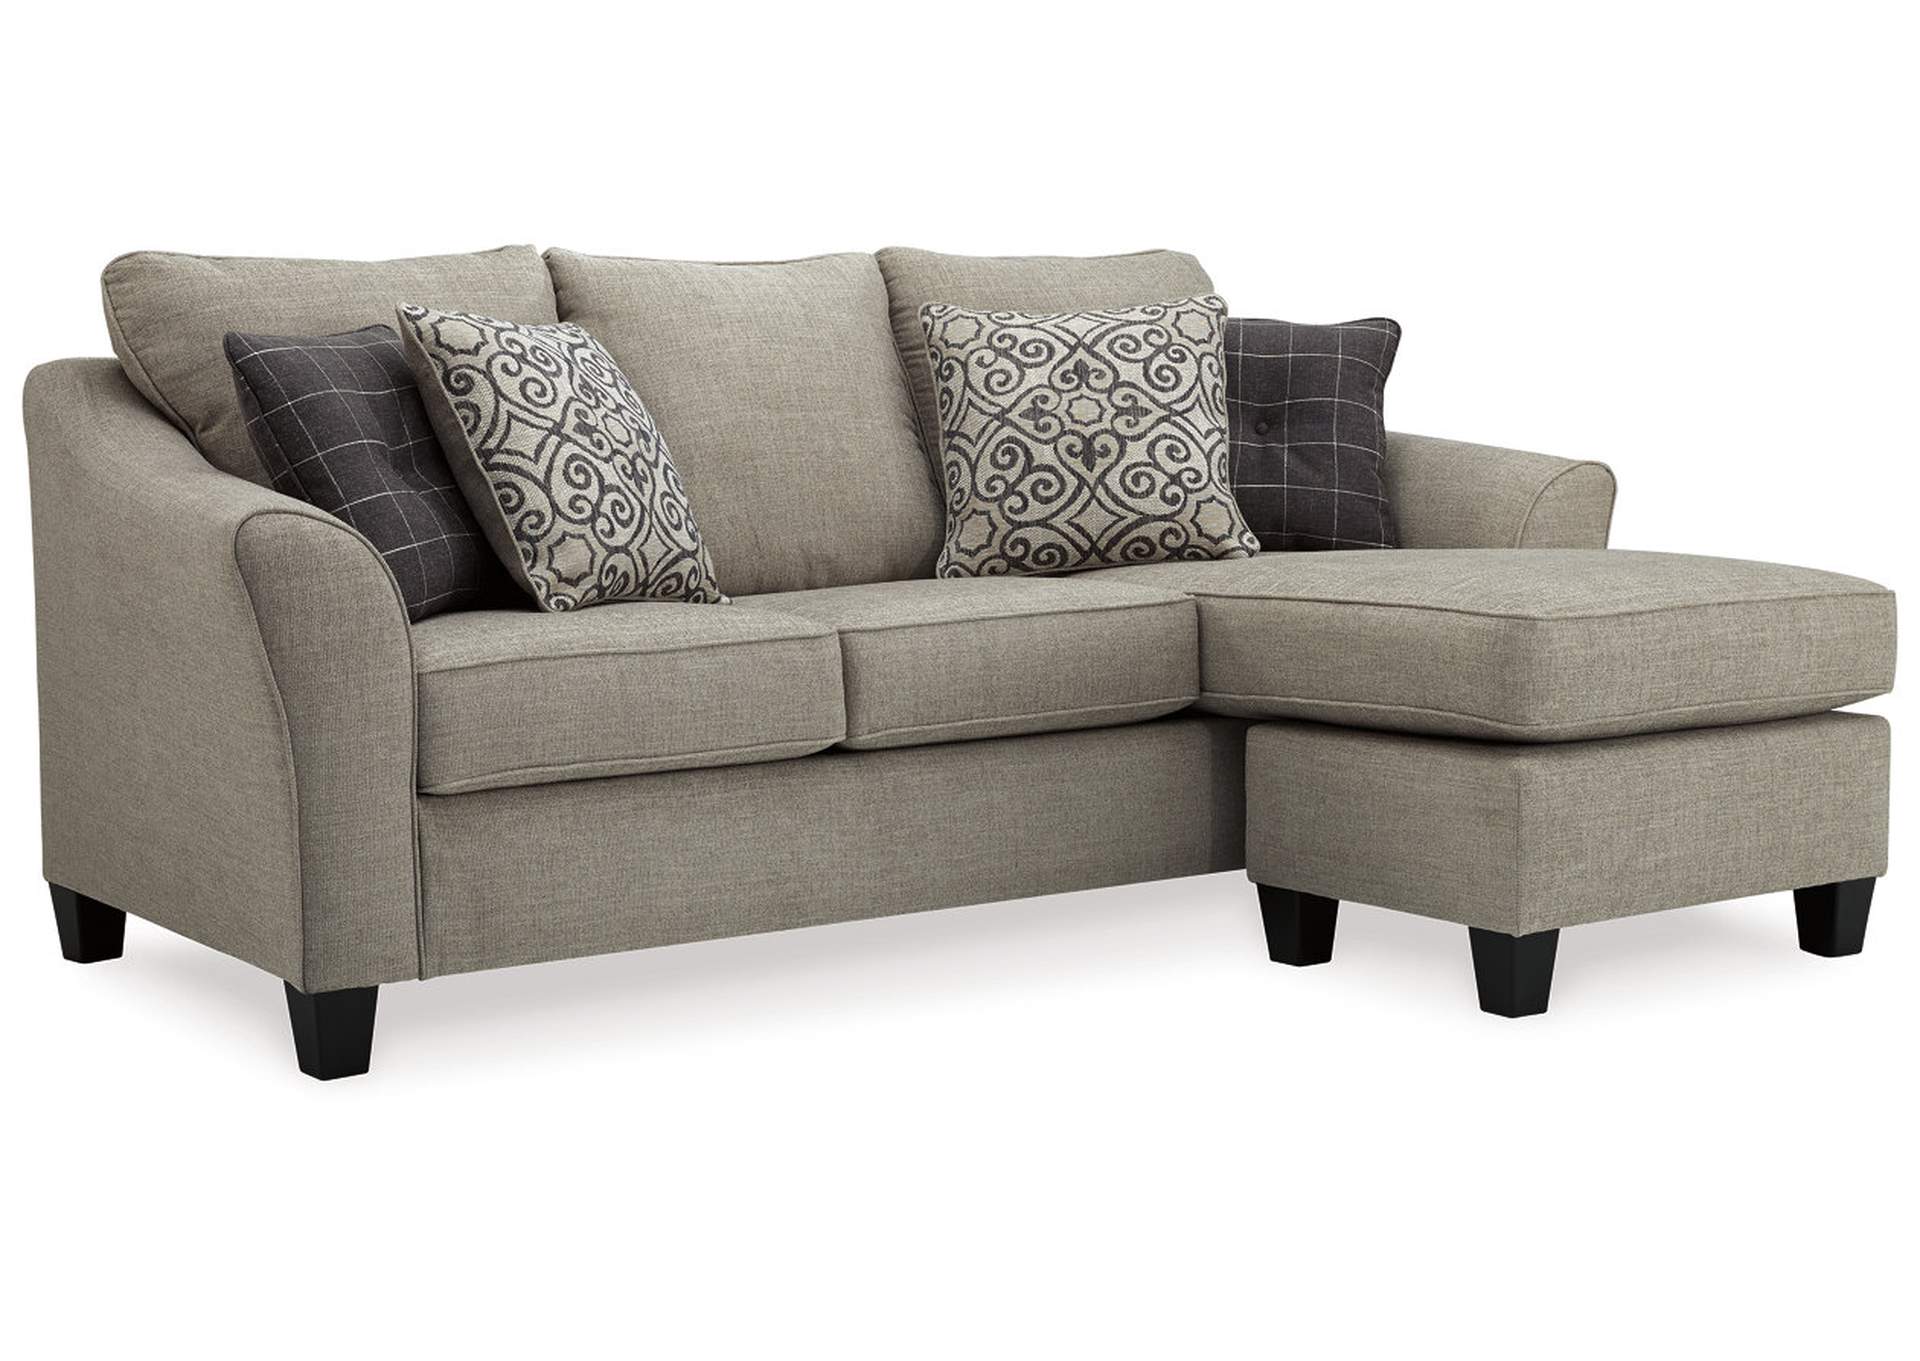 ashley furniture sofa bed queen